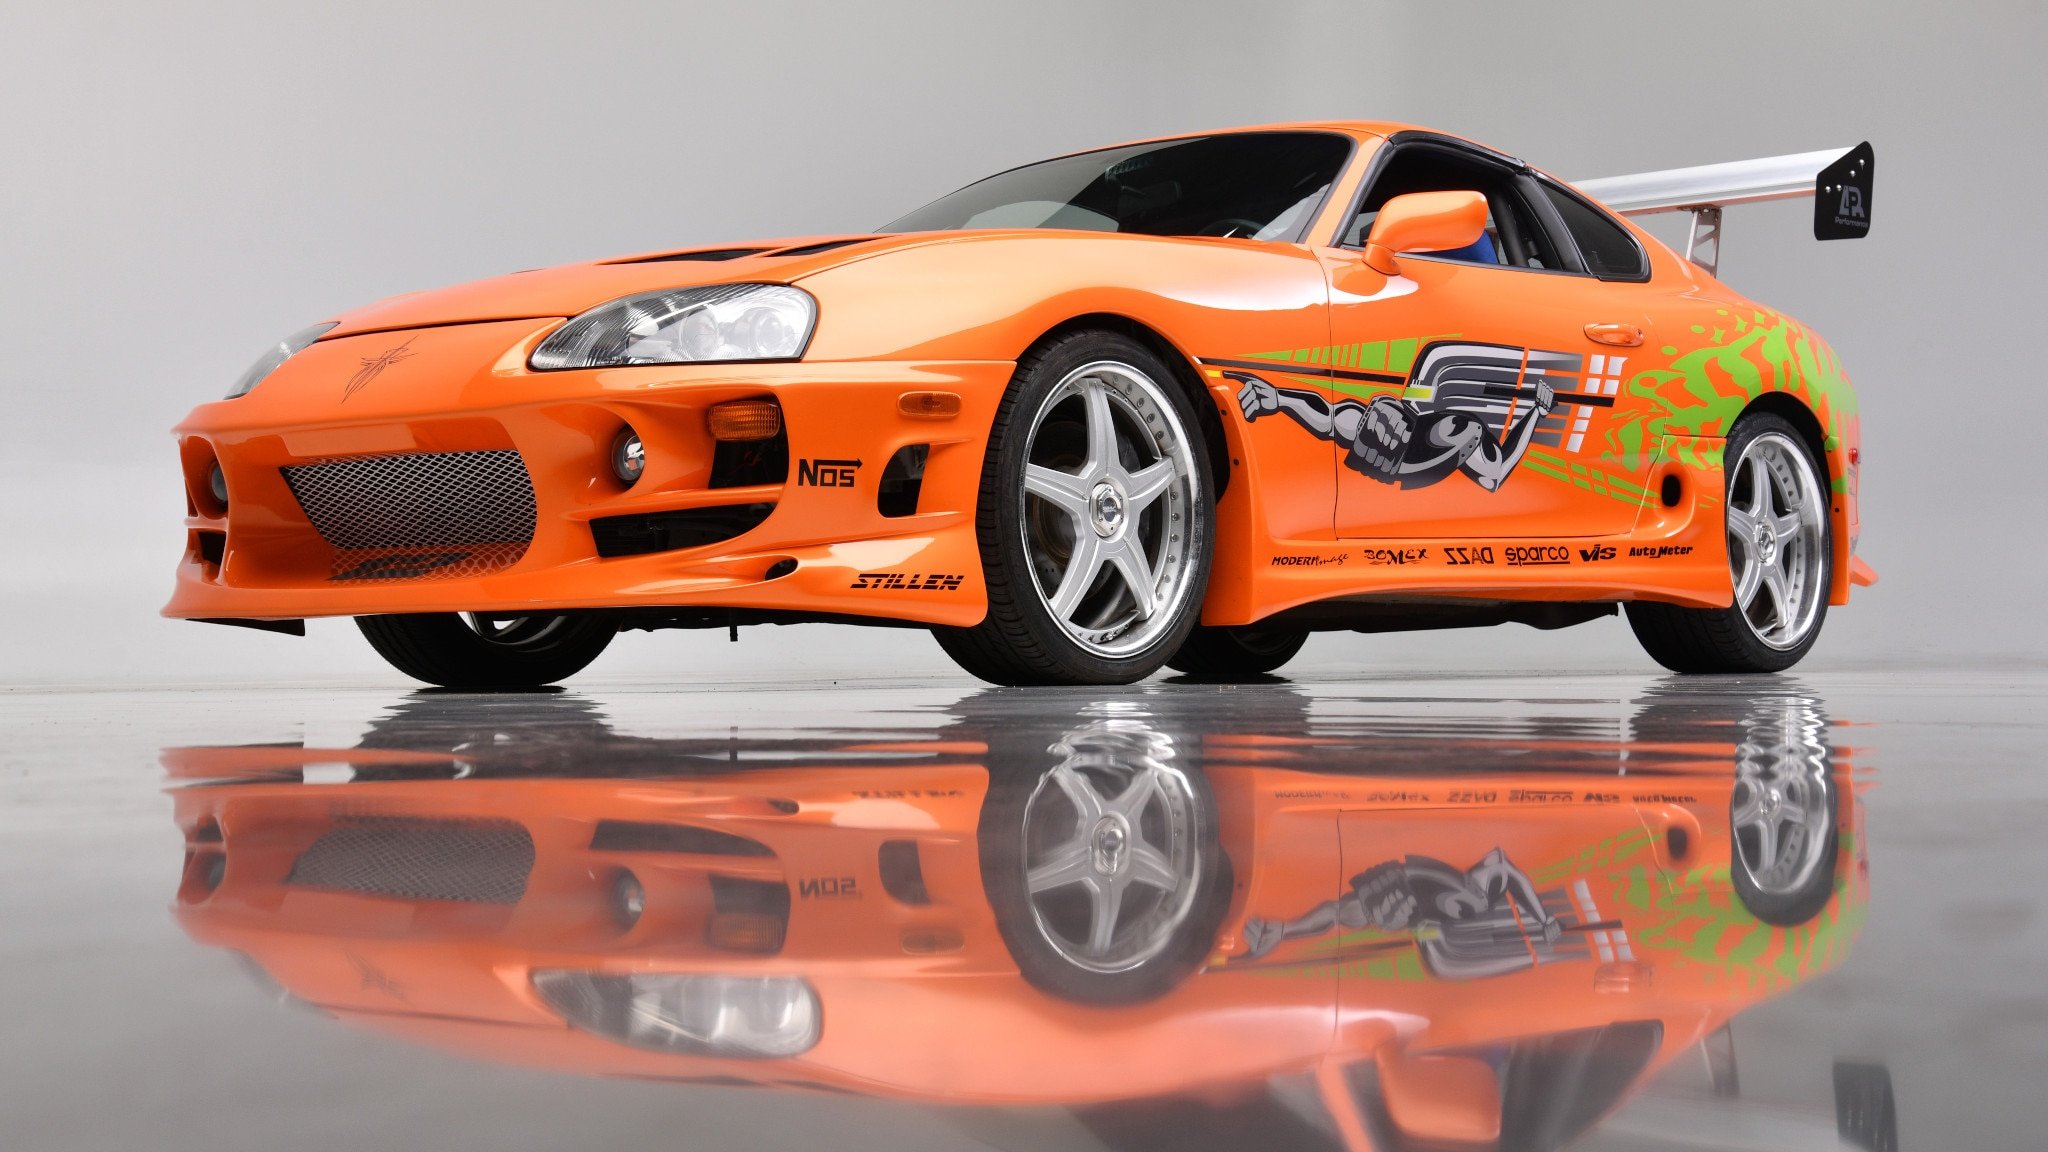 Paul Walker's Fast and Furious Toyota Supra Sells for Hollywood Money